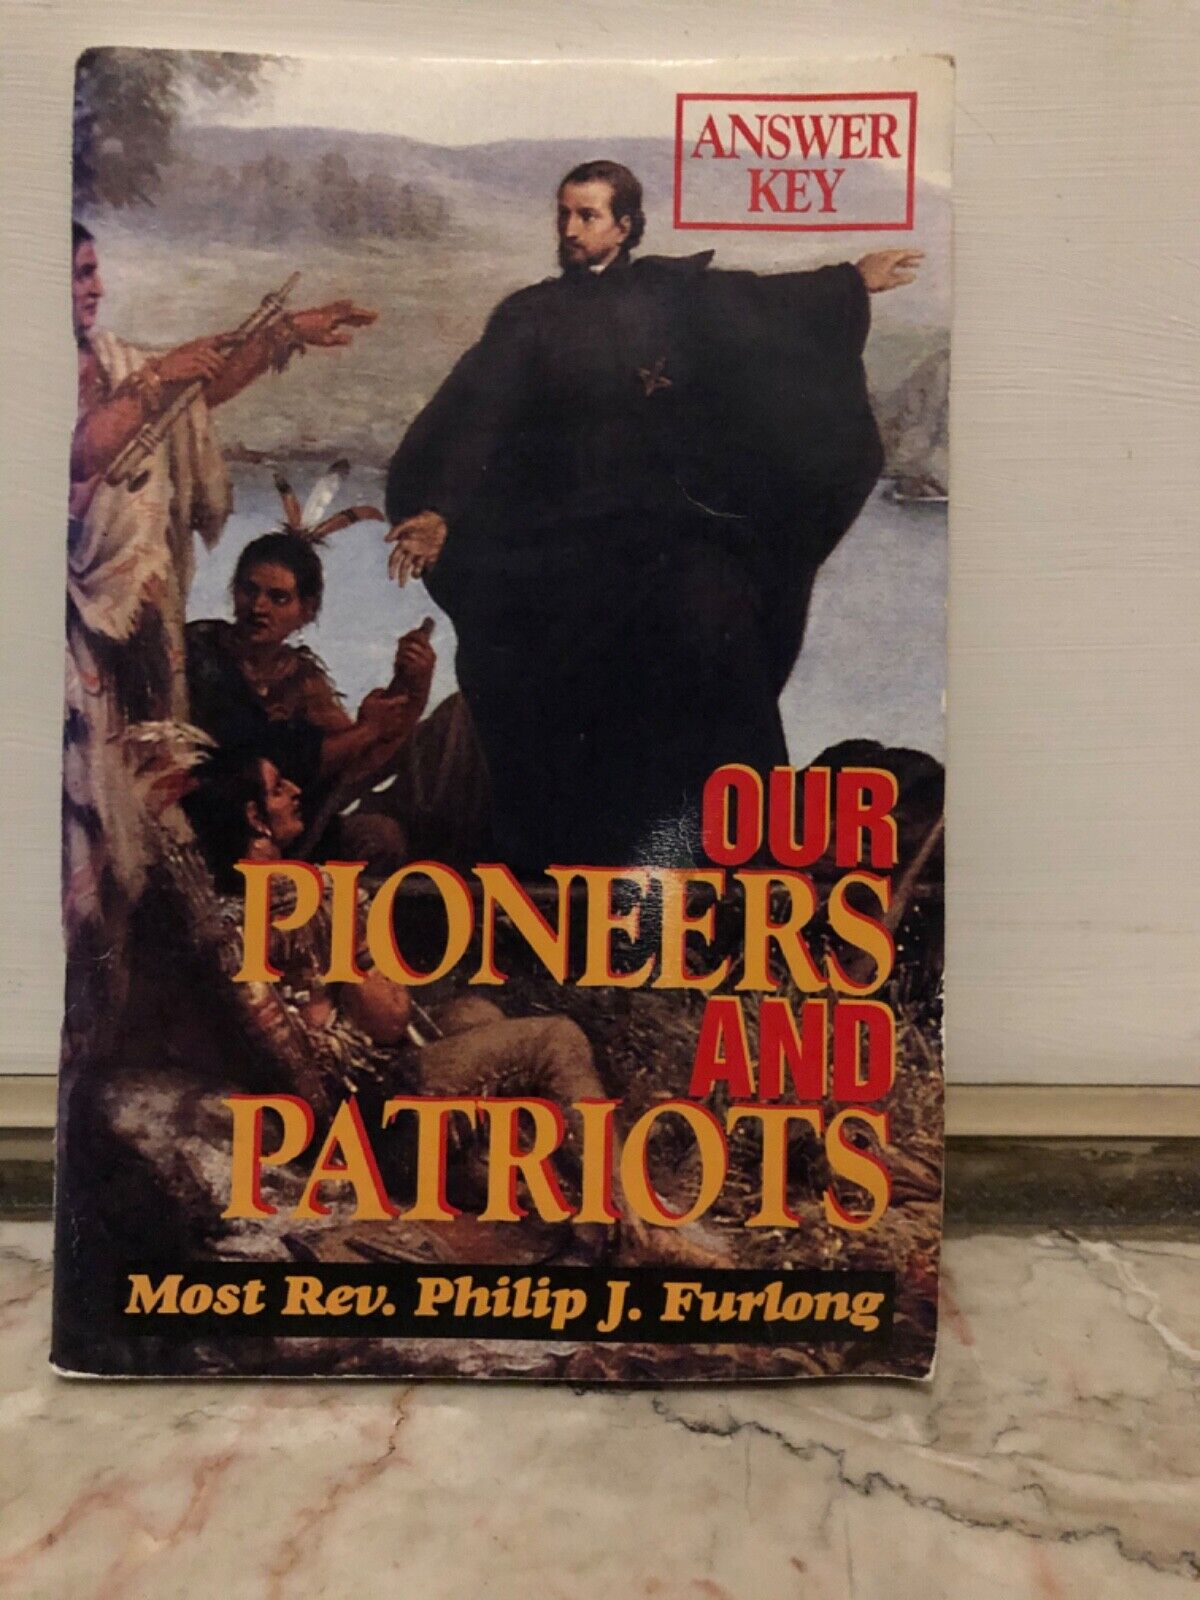 OUR PIONEERS AND PATRIOTS ANSWER KEY PAPERBACK BY PHILIP J. FURLONG 